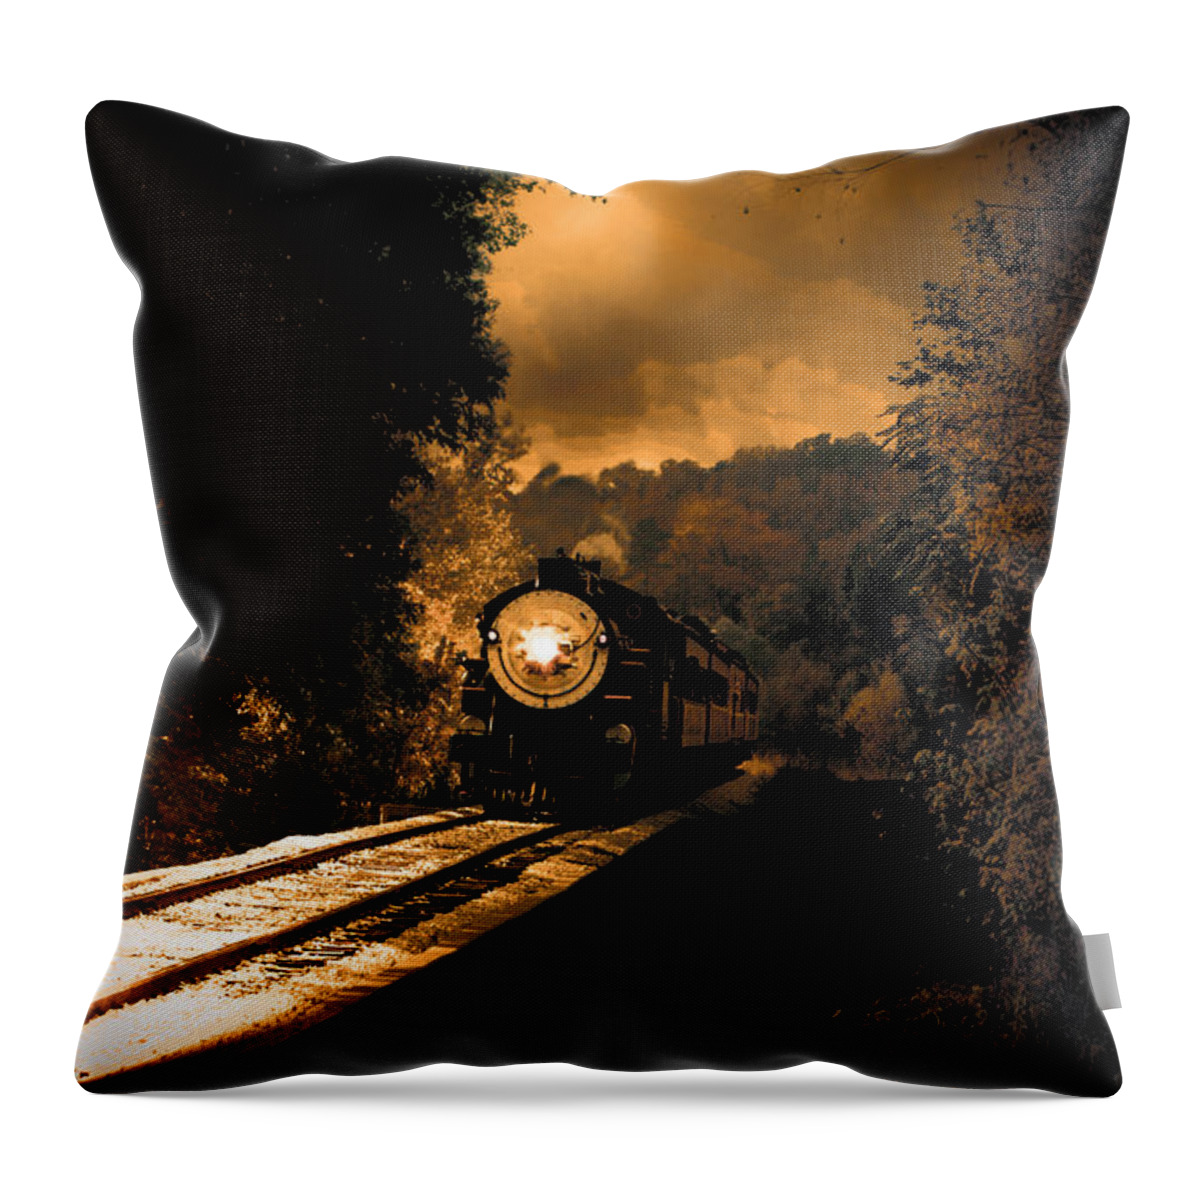 Transportation Throw Pillow featuring the photograph Lonesome Whistle by Robert Frederick